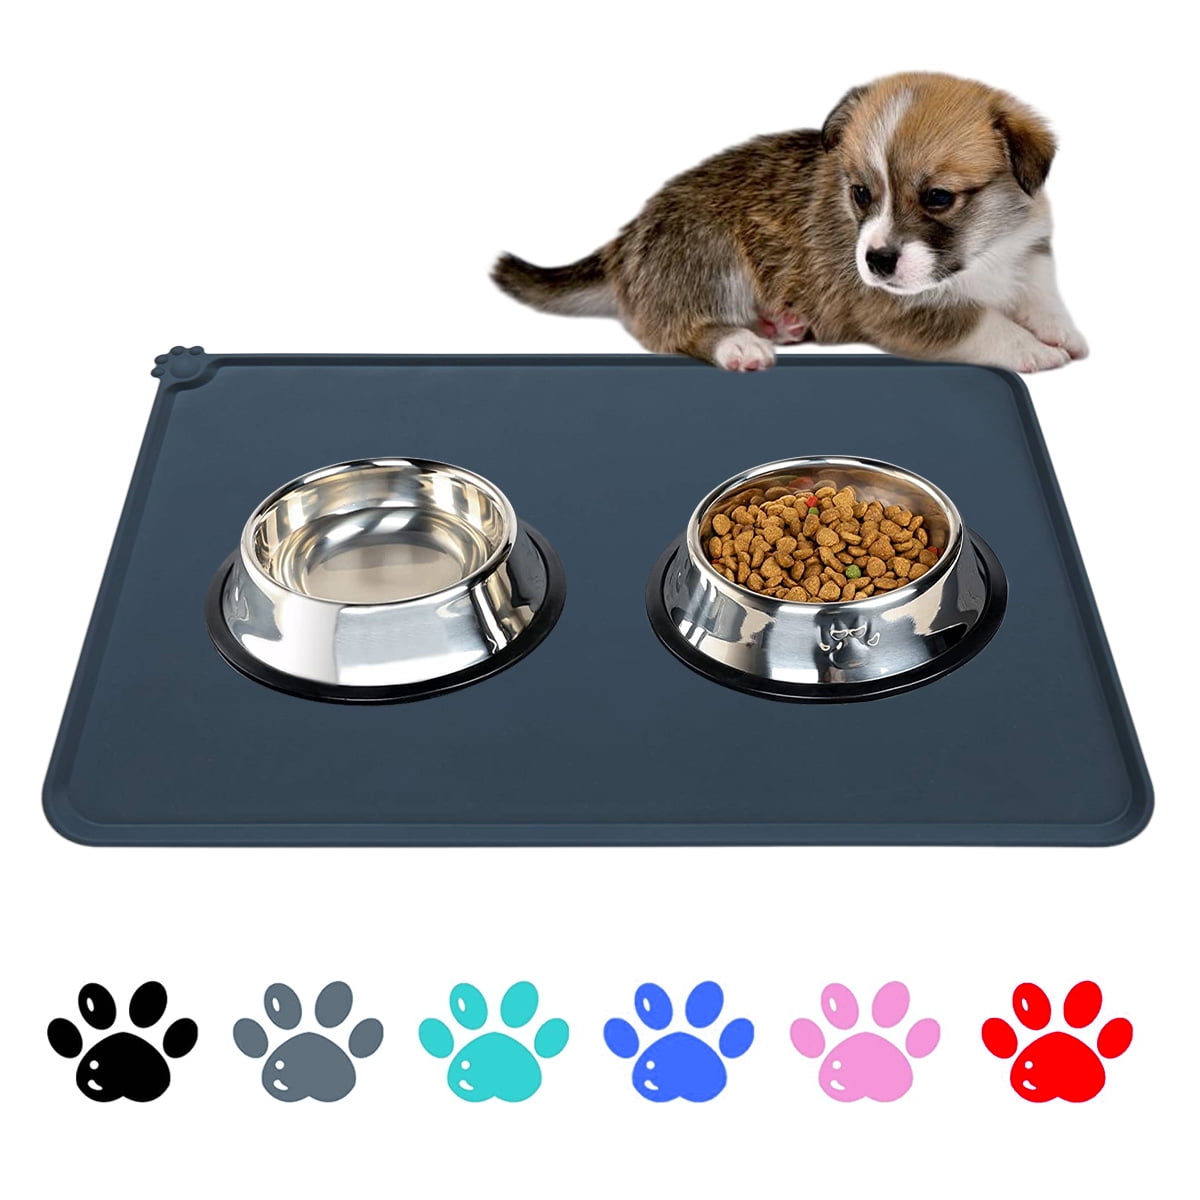 AVERYDAY 32x24 Silicone Dog Water Bowl Mat Fits Multi Cat Feeding  Stations, 0.63 High Edge XL Waterproof Rubber Pet Dog Cat Food Bowl  Mat/Tray for